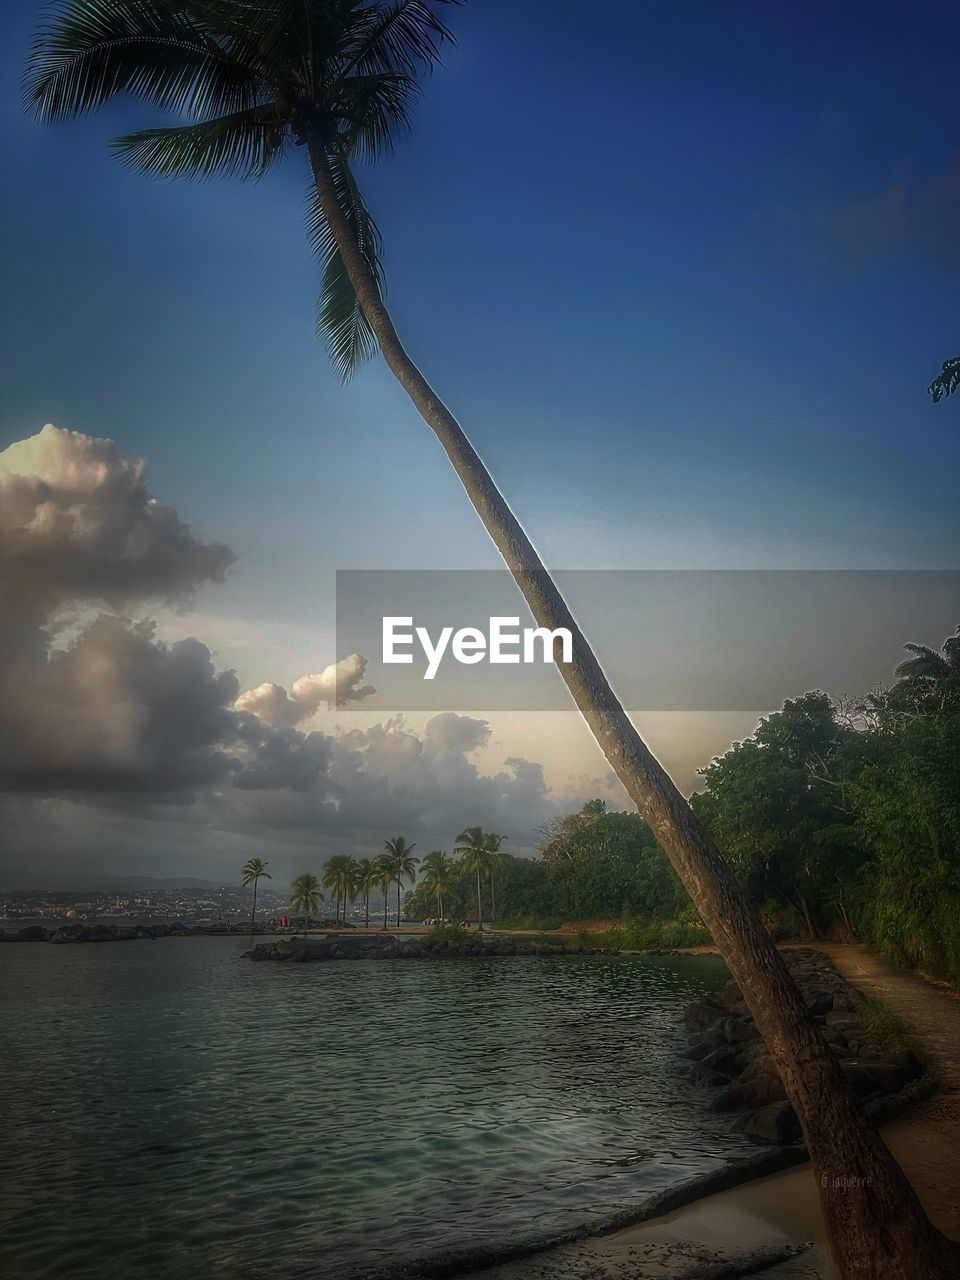 water, tree, sky, palm tree, tropical climate, nature, plant, sea, cloud, beauty in nature, coconut palm tree, land, reflection, environment, morning, scenics - nature, beach, tranquility, tropical tree, no people, sunlight, travel destinations, dusk, tropics, outdoors, travel, tranquil scene, landscape, architecture, blue, vacation, holiday, trip, island, ocean, tourism, idyllic, coast, shore, body of water, horizon